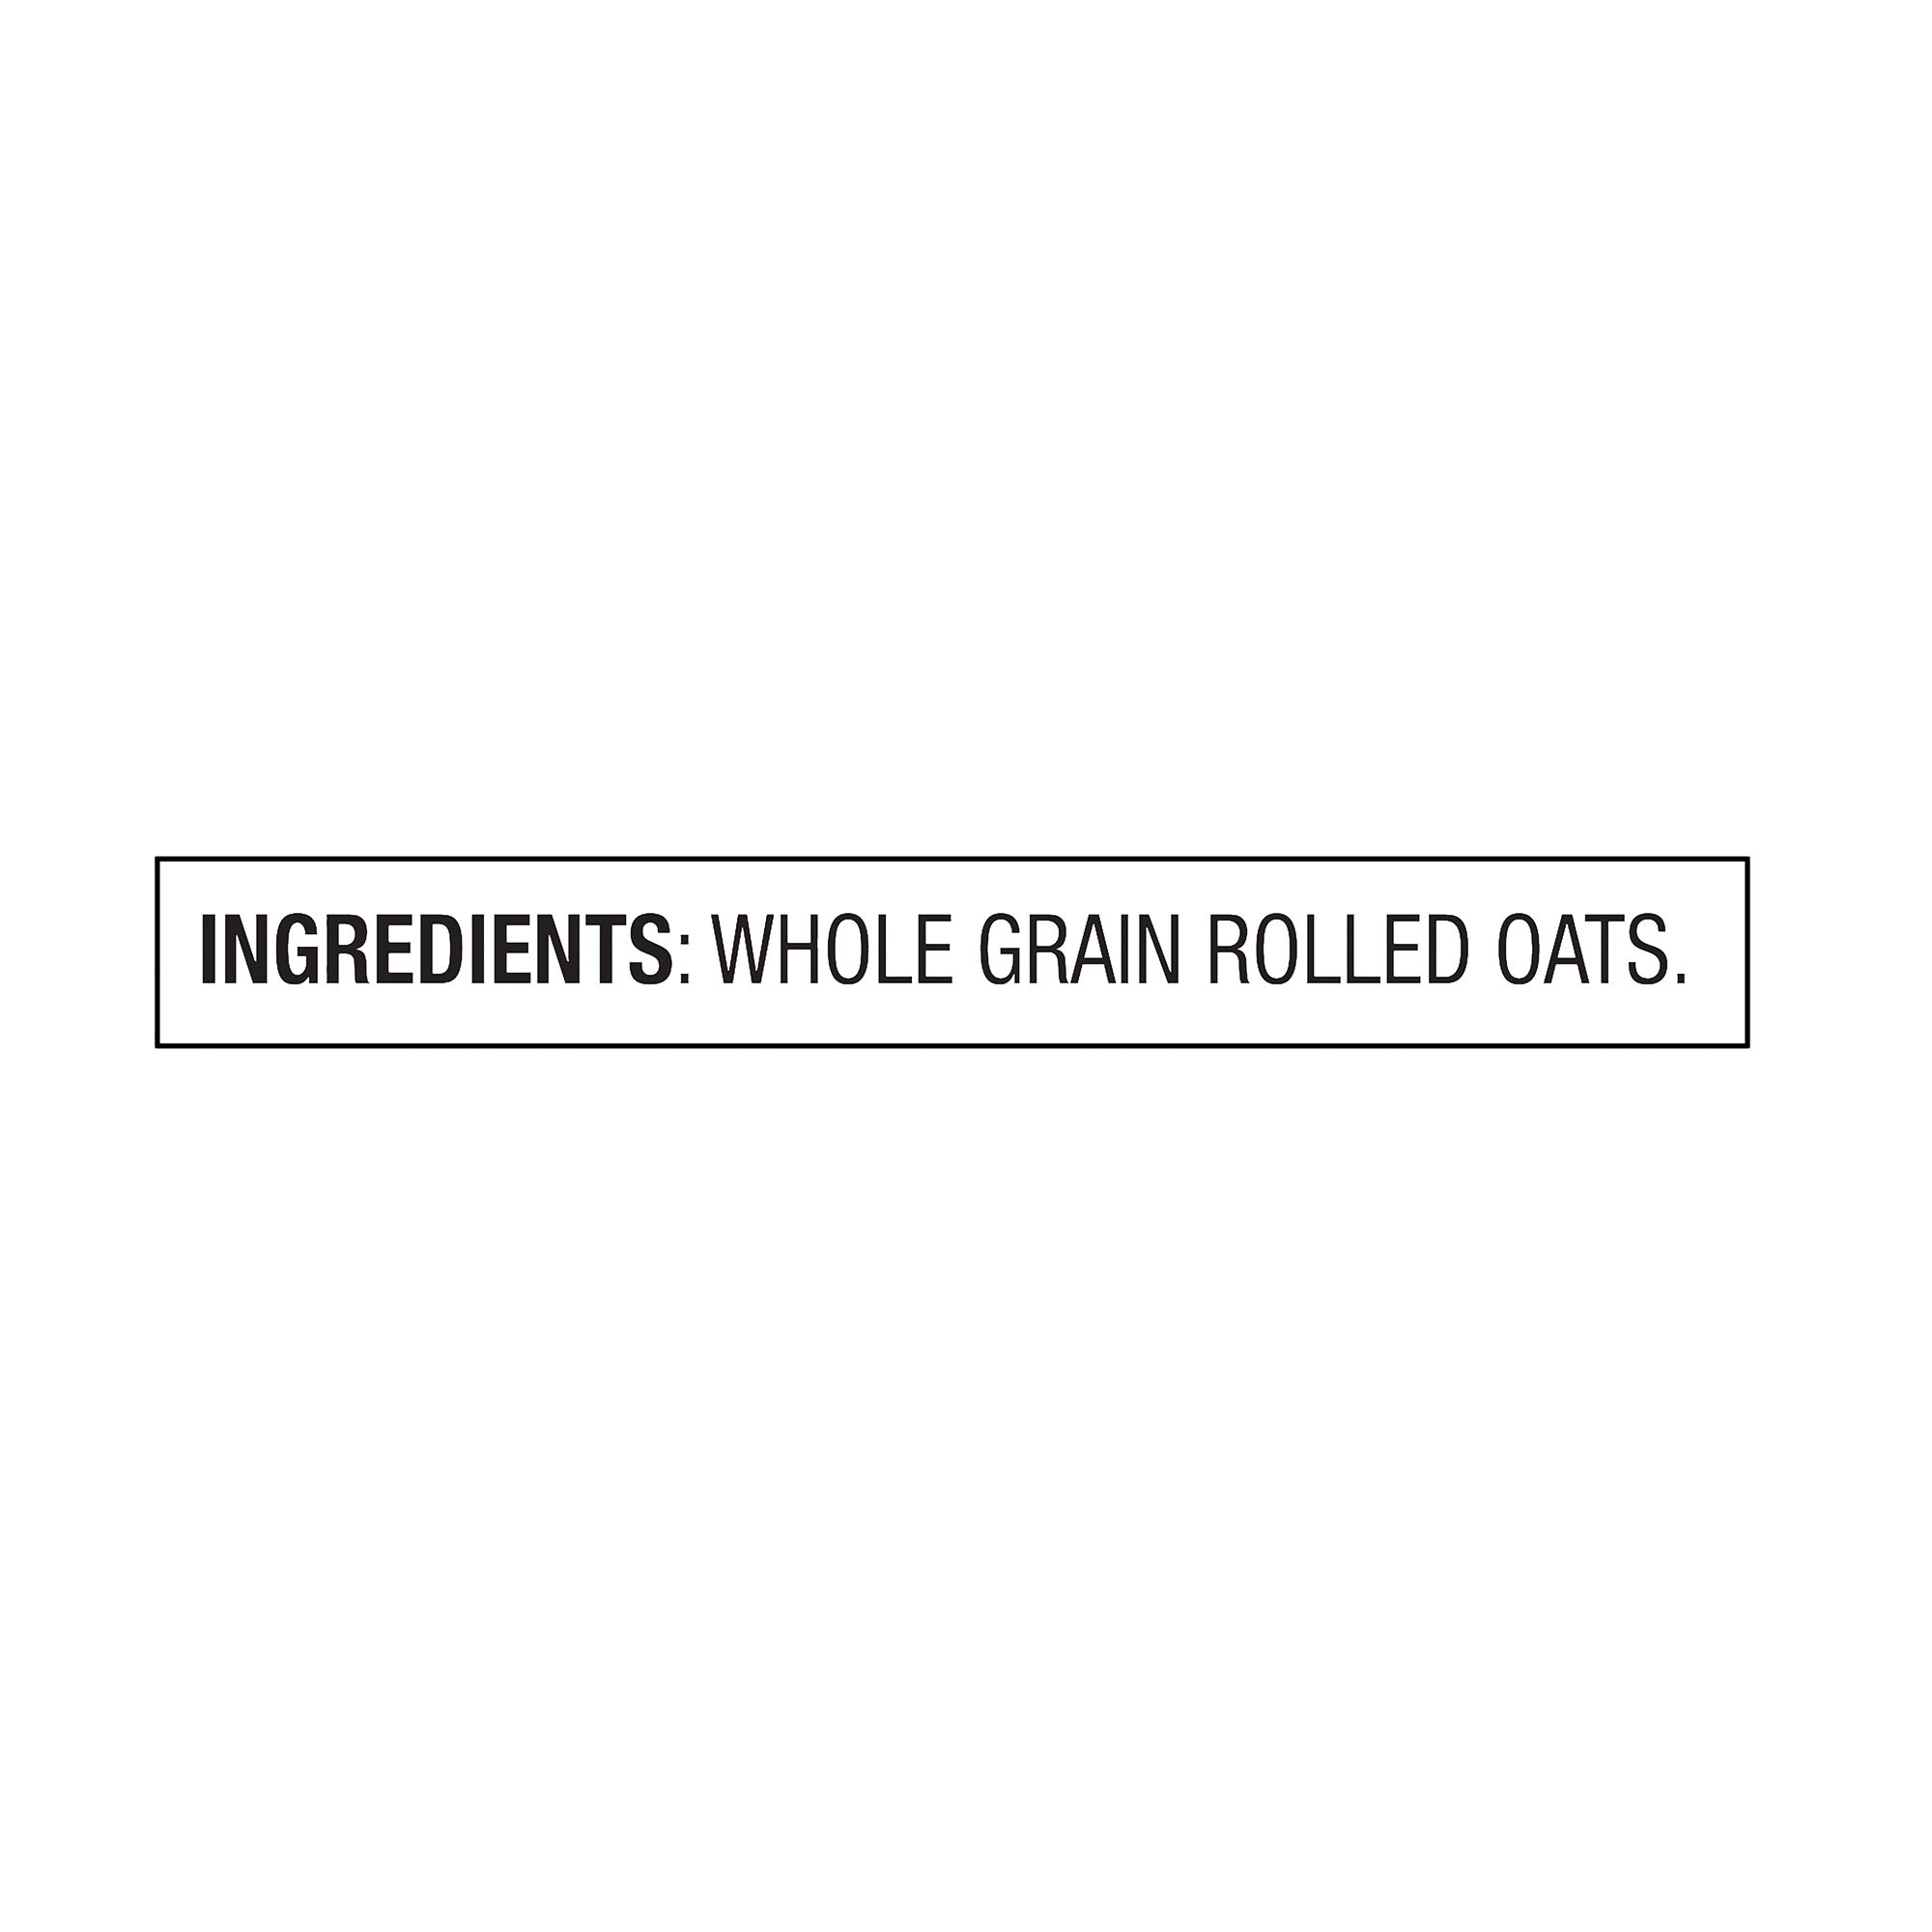 Great Value 100% Whole Grain Old Fashioned Oats, 42 oz - image 4 of 8